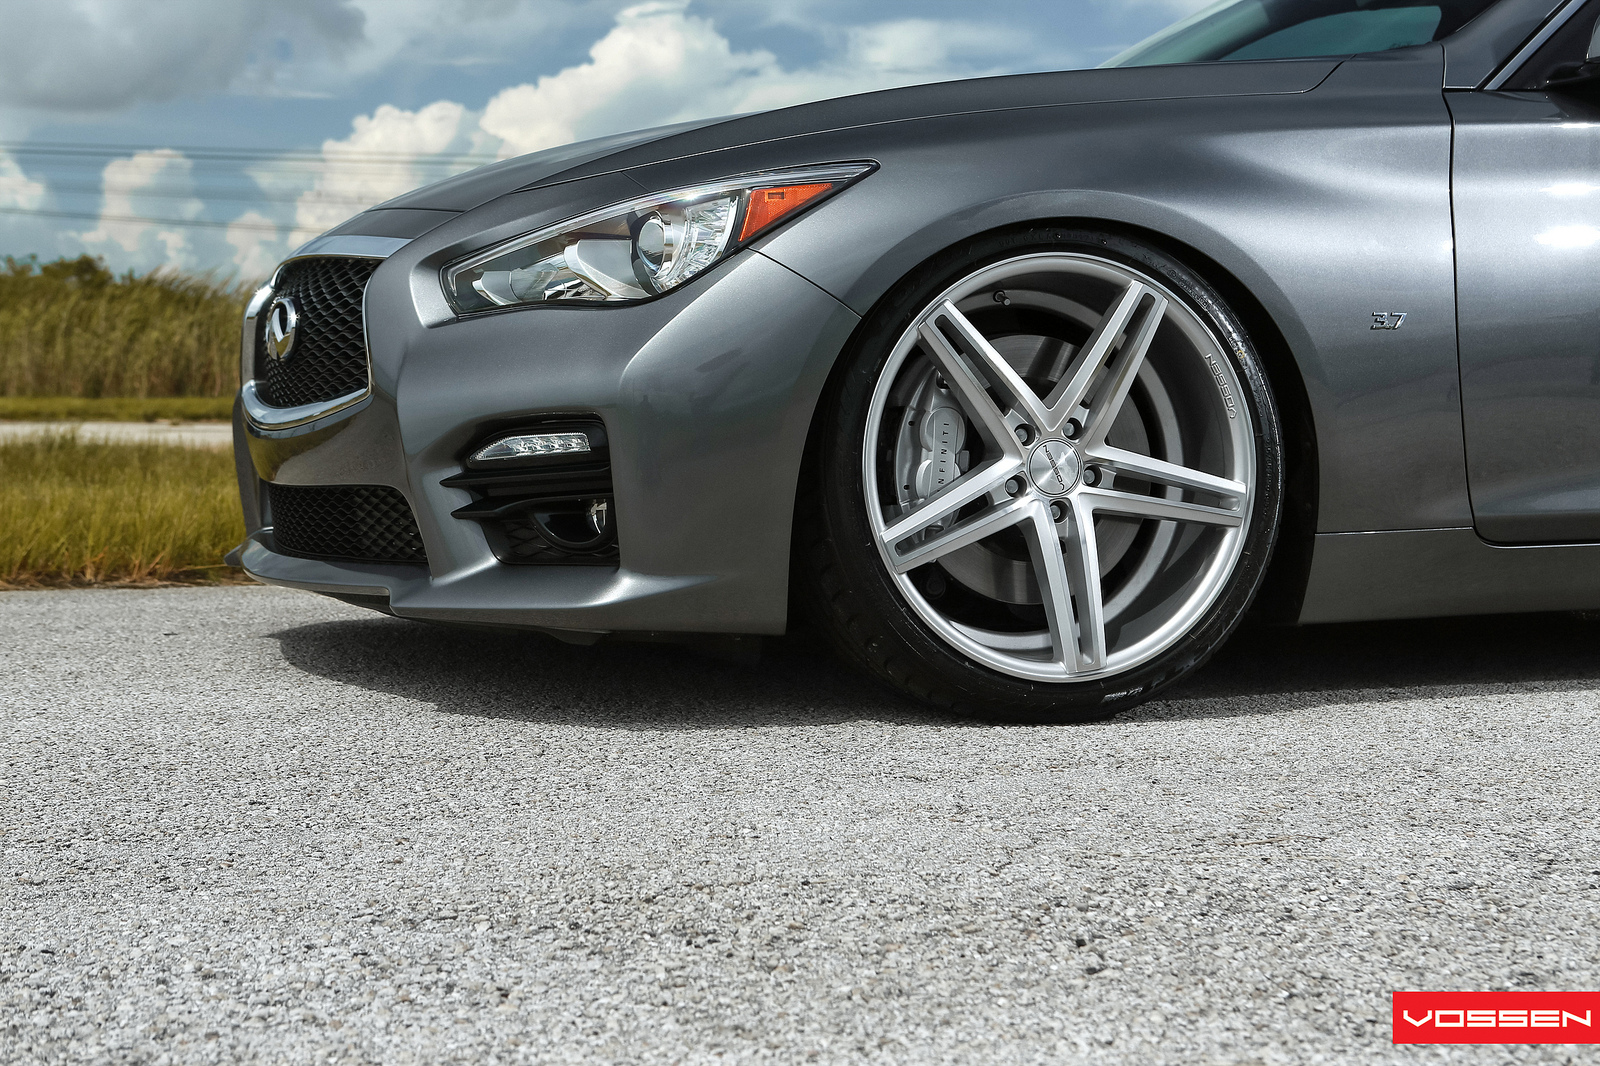 worlds-first-modified-2014-infiniti-q50-s-gets-vossen-concave-wheels-video-photo-gallery_9.jpg